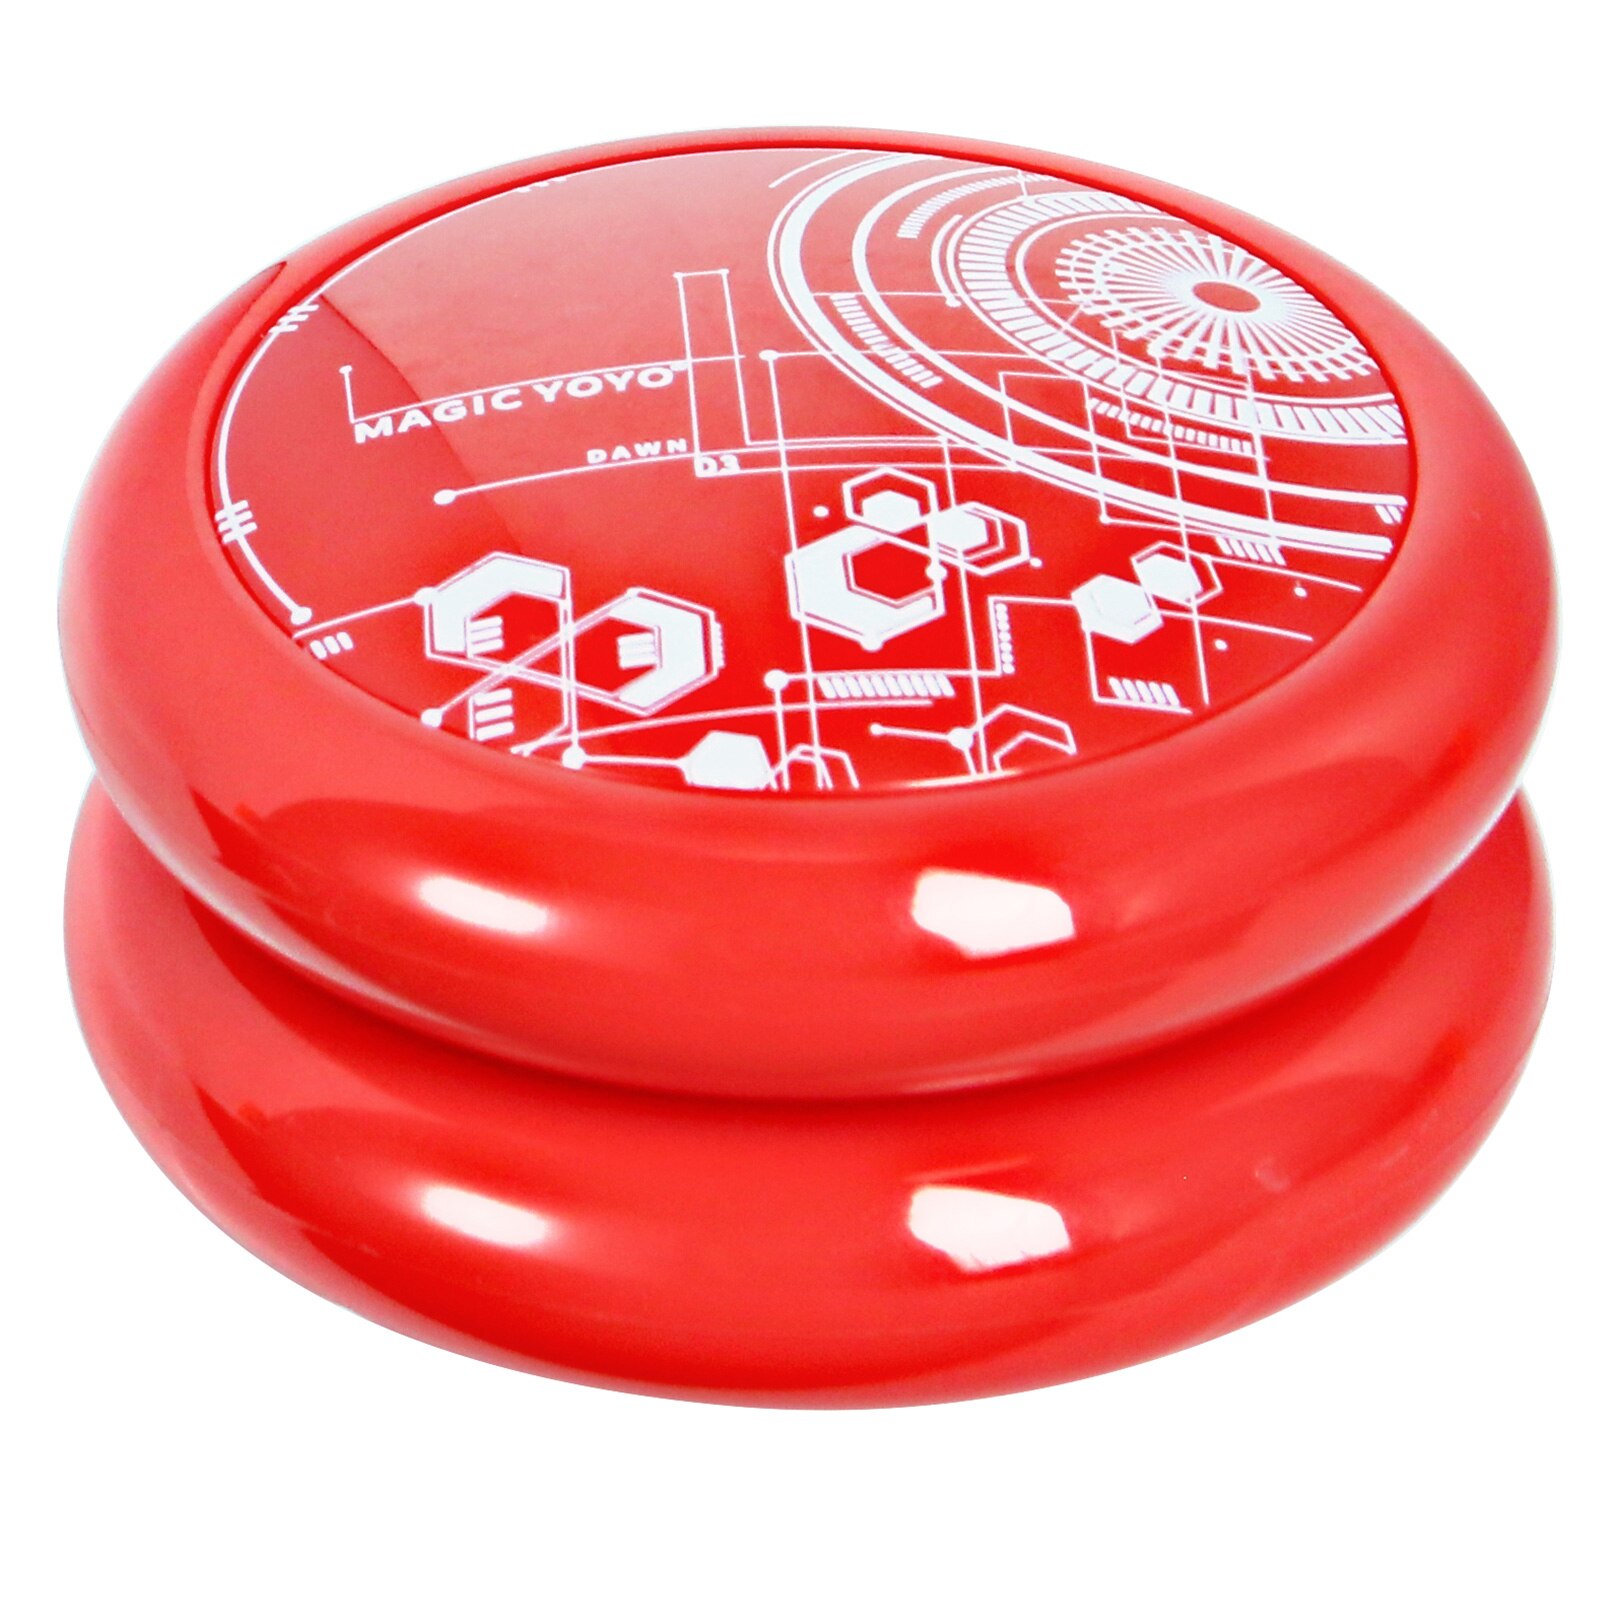 Responsive Yoyos for Kids Classic Baby Toys Beginner Yoyo with Narrow Bearing Steel Axle ABS Body Looping Play Spinning Faster